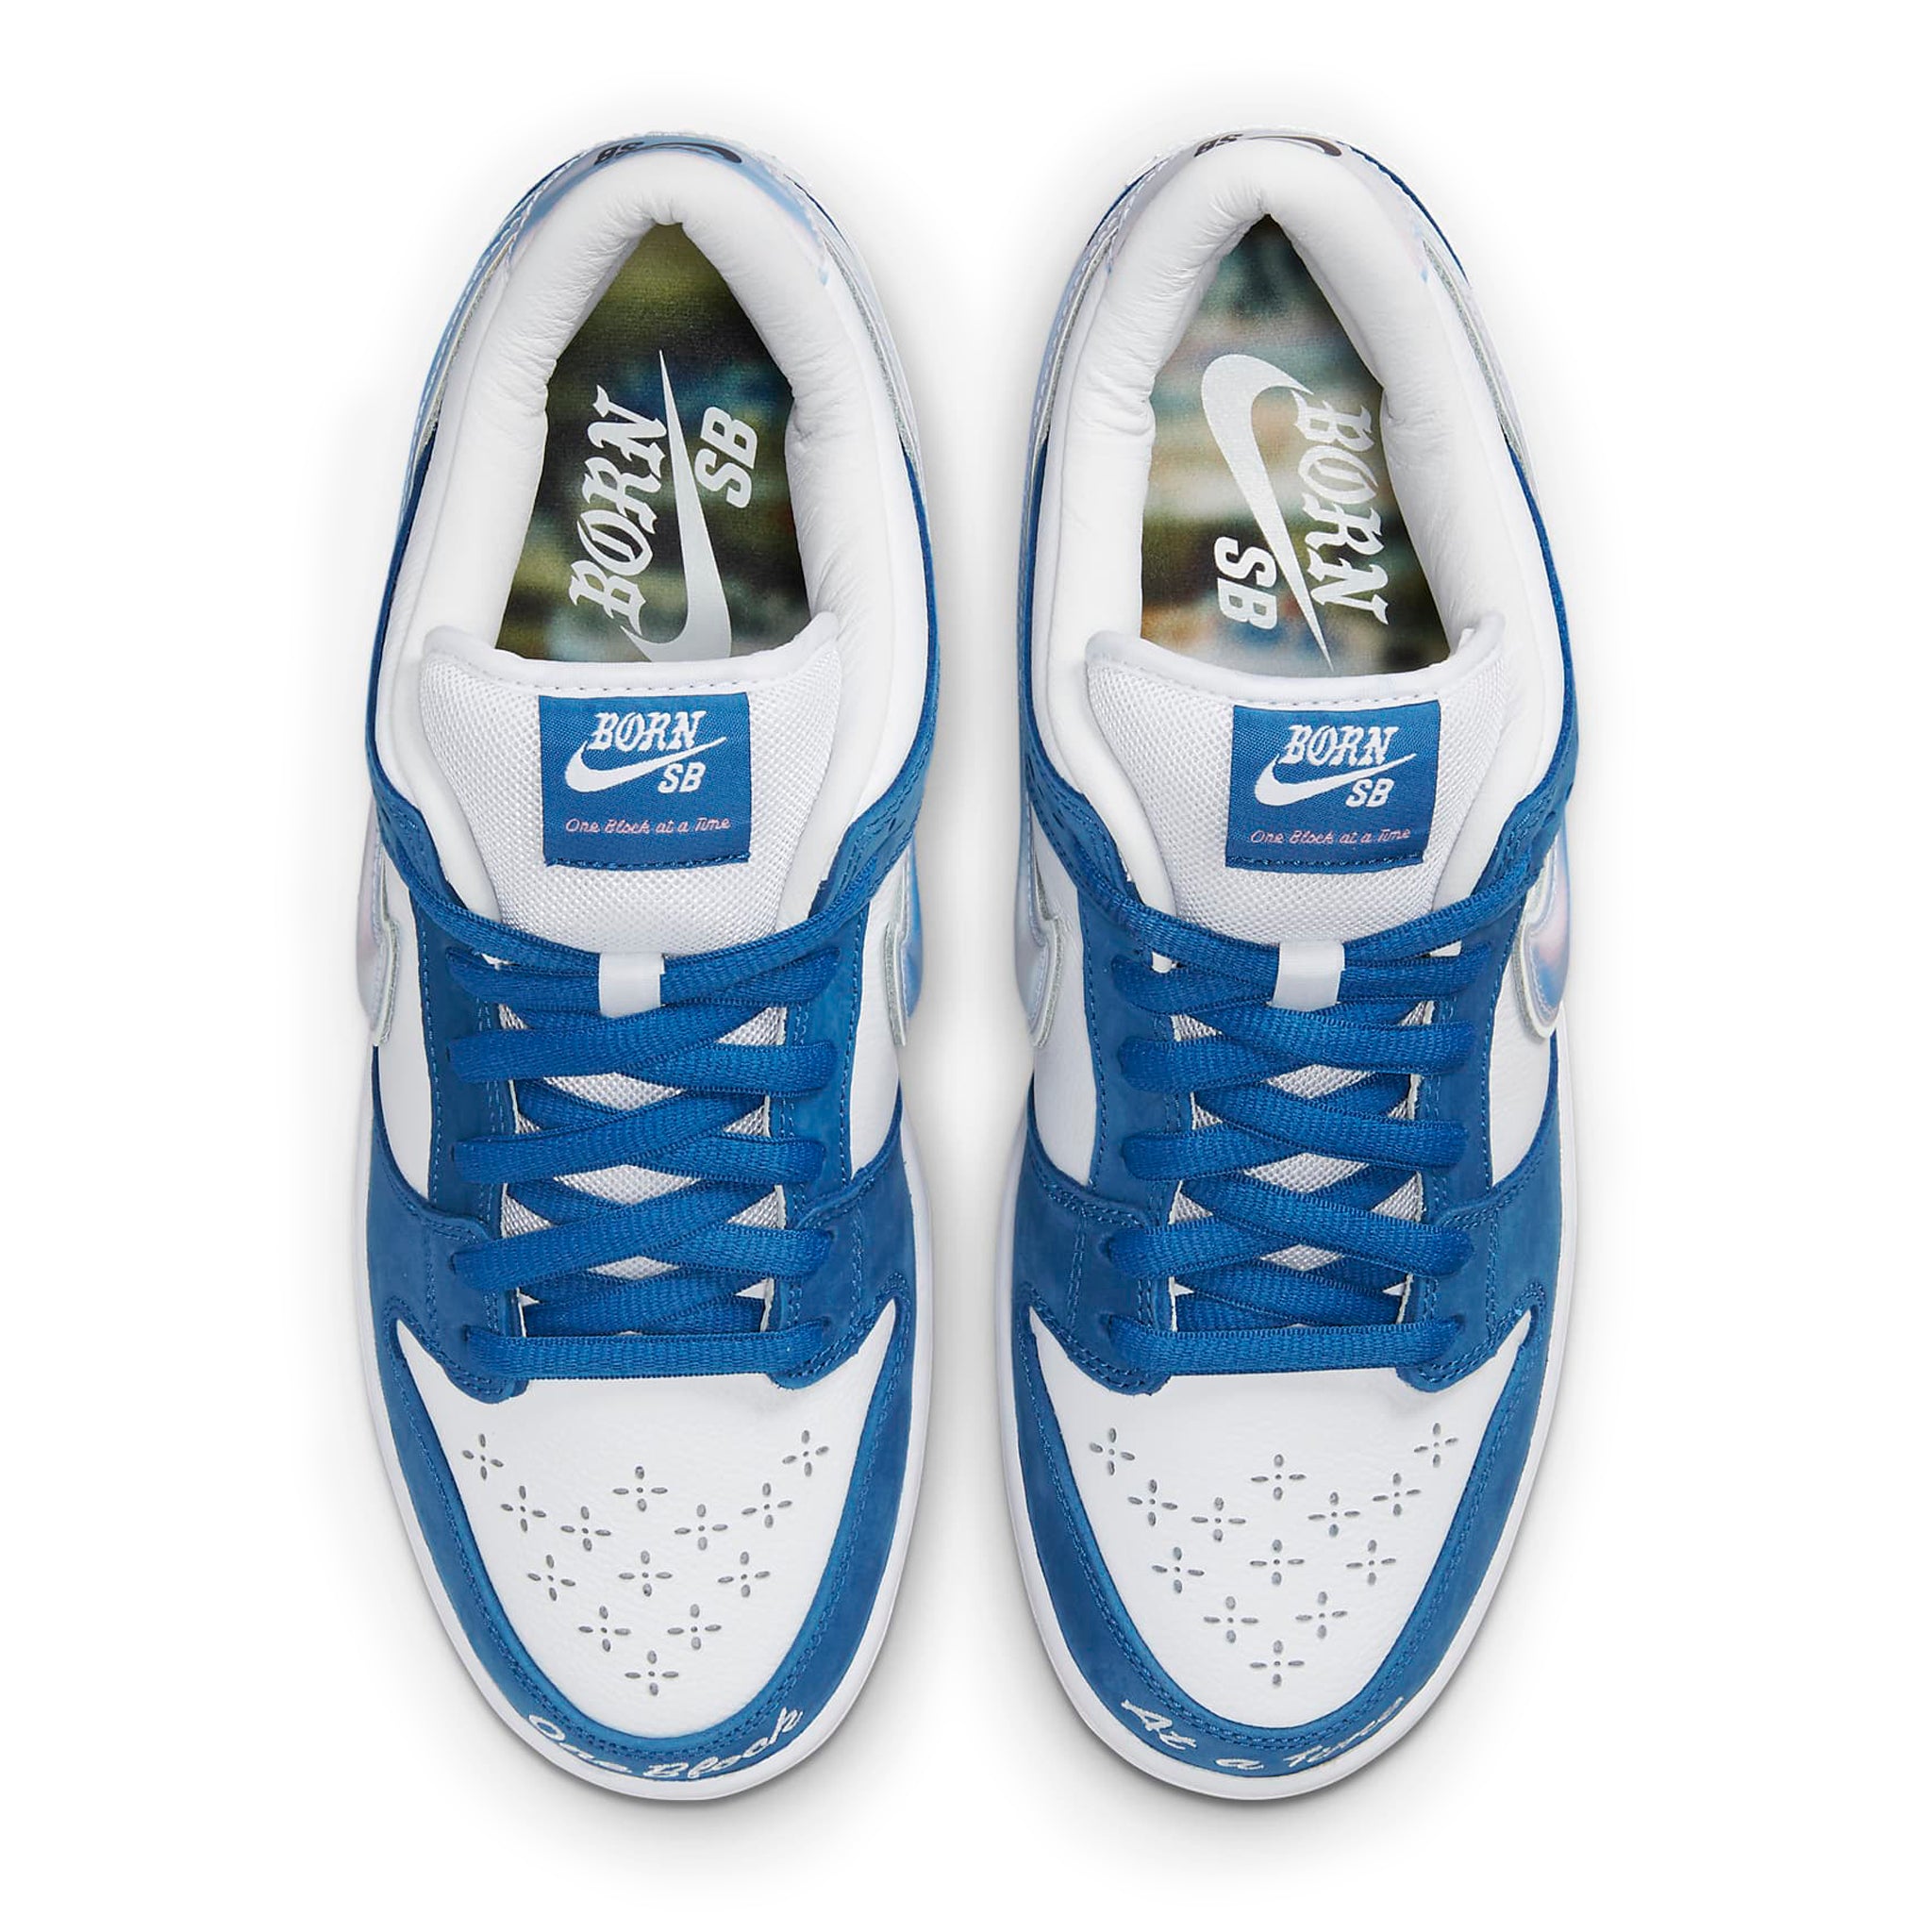 Top view of Born x Raised x Nike SB Dunk Low One Block at a Time FN7819-400